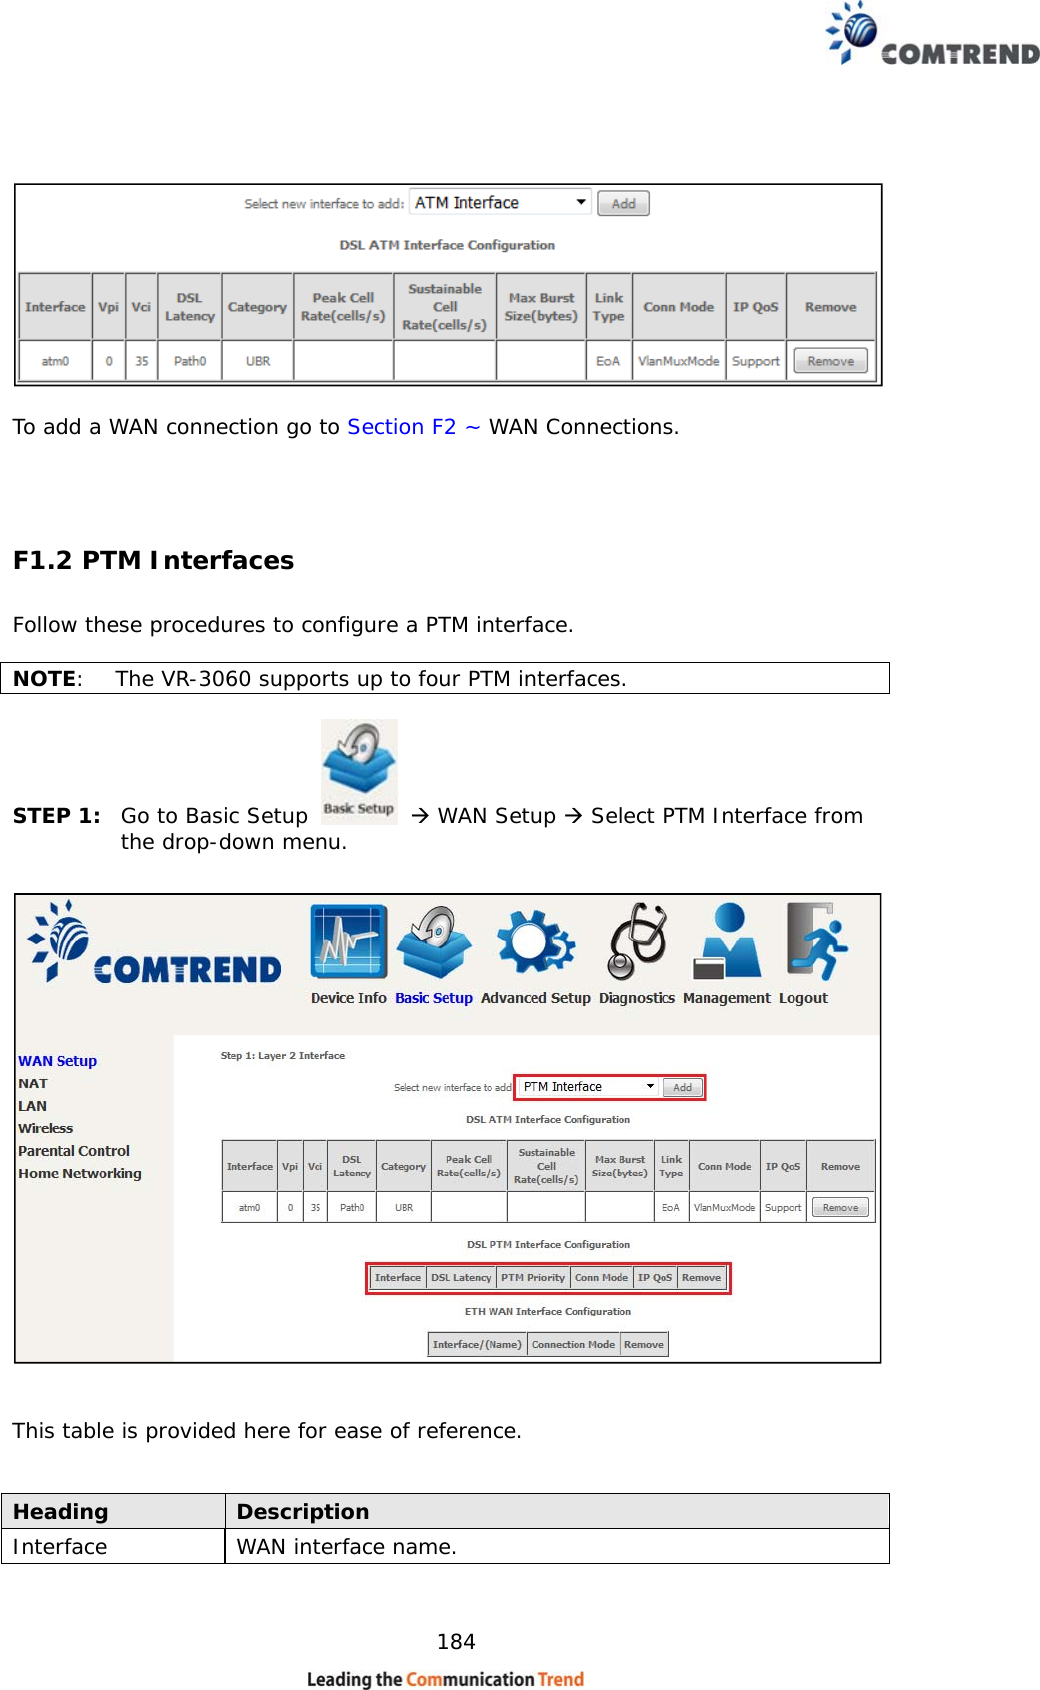    184     To add a WAN connection go to Section F2 ~ WAN Connections.  F1.2 PTM Interfaces Follow these procedures to configure a PTM interface.    NOTE:  The VR-3060 supports up to four PTM interfaces.   STEP 1:  Go to Basic Setup    WAN Setup  Select PTM Interface from the drop-down menu.     This table is provided here for ease of reference.   Heading  Description Interface  WAN interface name. 